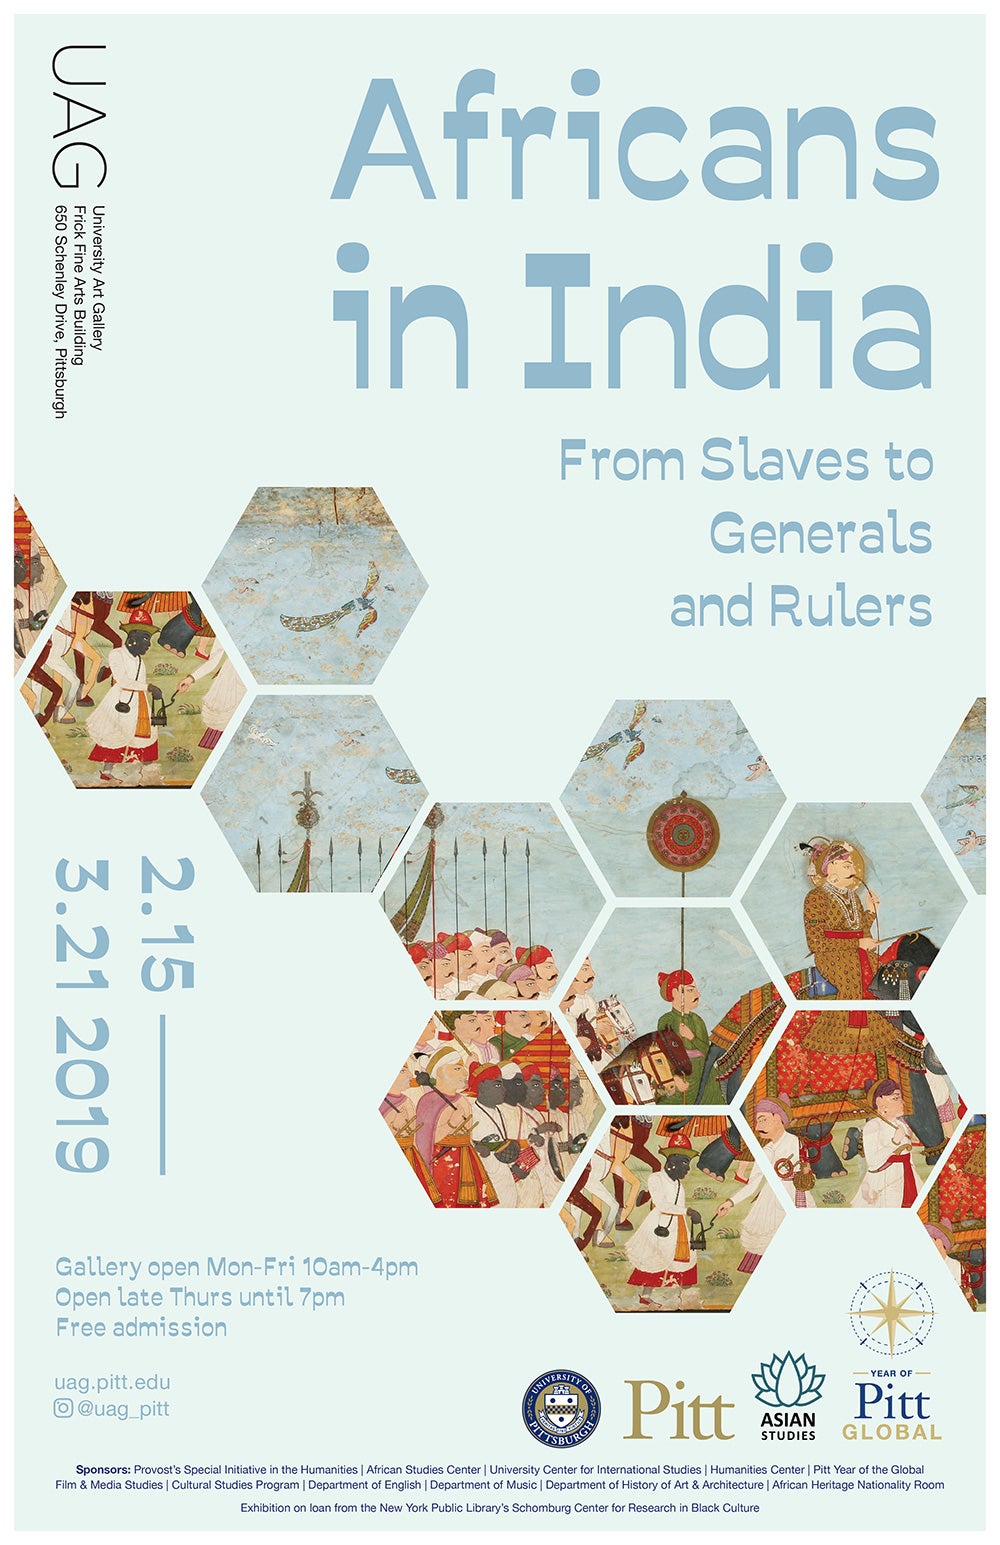 University Art Gallery Exhibition Africans in India: From Slaves to Generals and Rulers